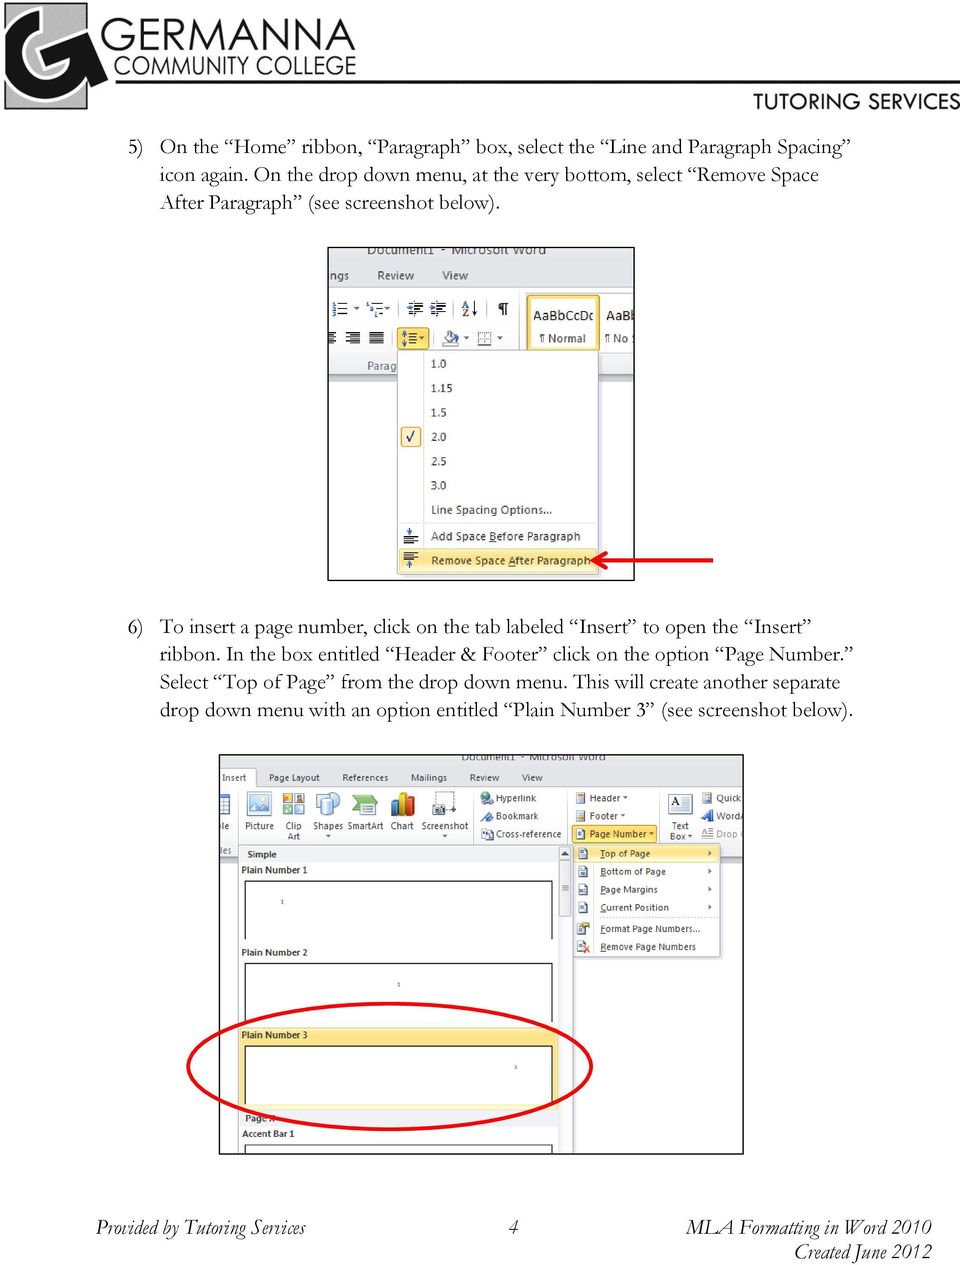 6) To insert a page number, click on the tab labeled Insert to open the Insert ribbon.